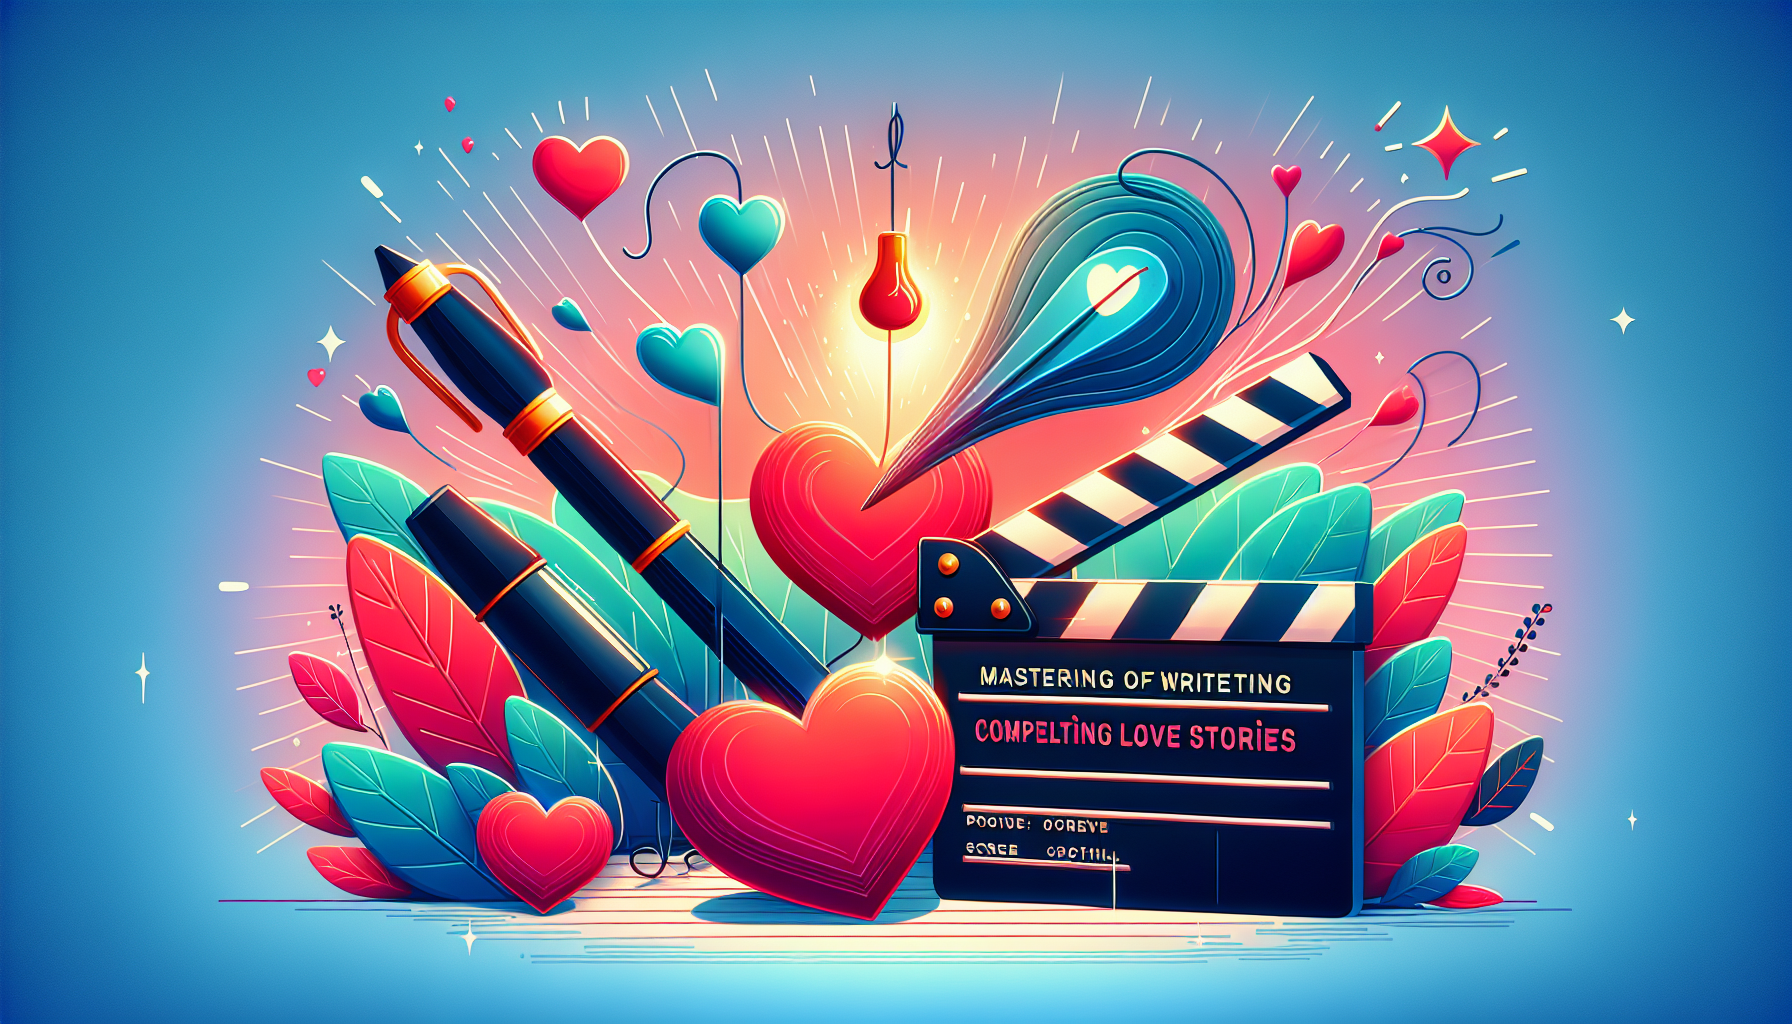 A modern and colorful illustration of a metaphorical representation that embodies mastering the art of writing compelling love stories for the screen. The scene might include objects such as a pen symbolizing writing, a heart symbolizing love, and a clapperboard symbolizing the screen or movies. They might be animated and placed in a storytelling setting, evoking romance, emotion, and creativity.